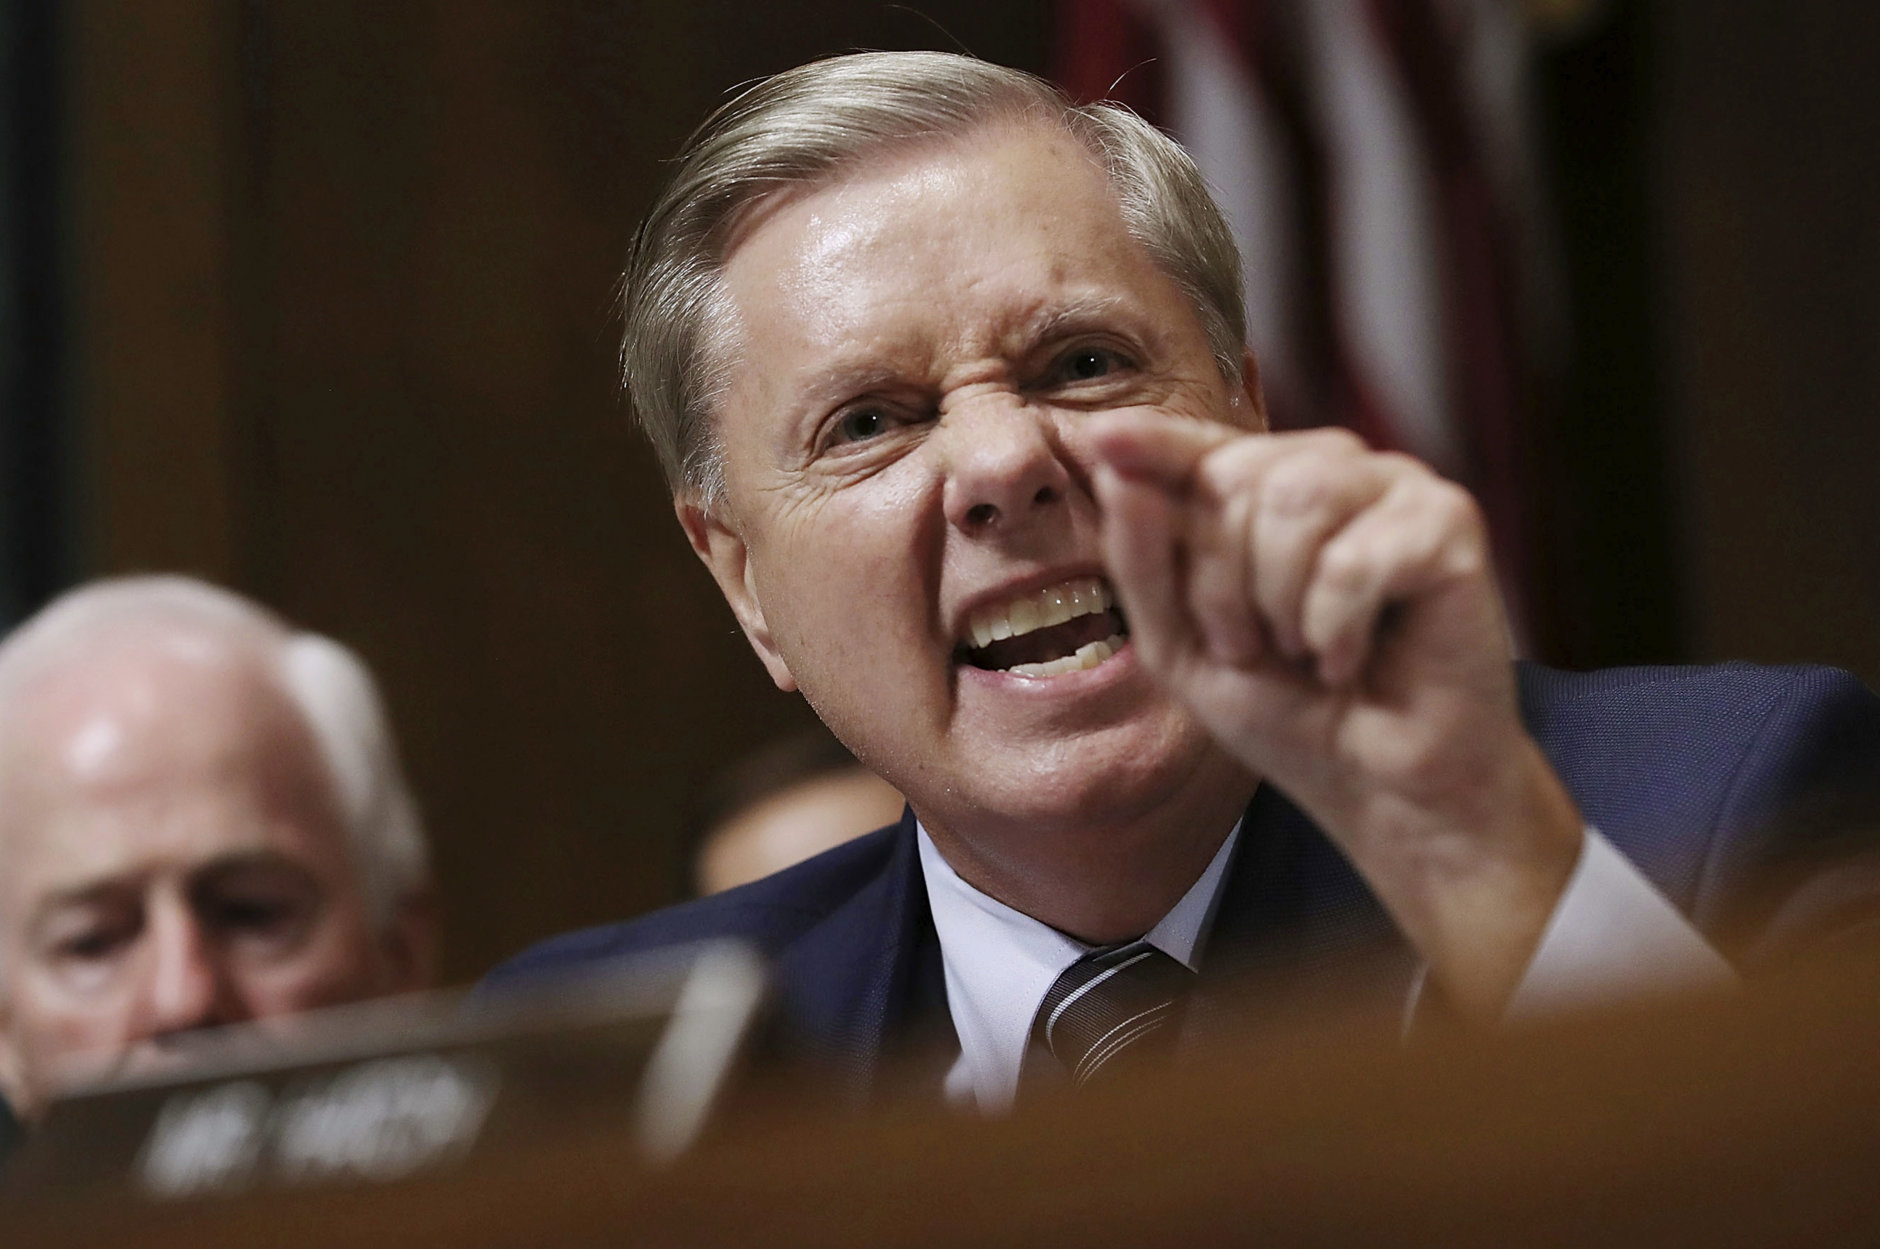 Sen. Lindsey Graham, R-S.C., makes a point during a hearing with Supreme Court nominee Judge Brett Kavanaugh during his Senate Justice Committee hearing, Thursday, Sept. 27, 2018 in Washington. (Win McNamee/Pool Image via AP)